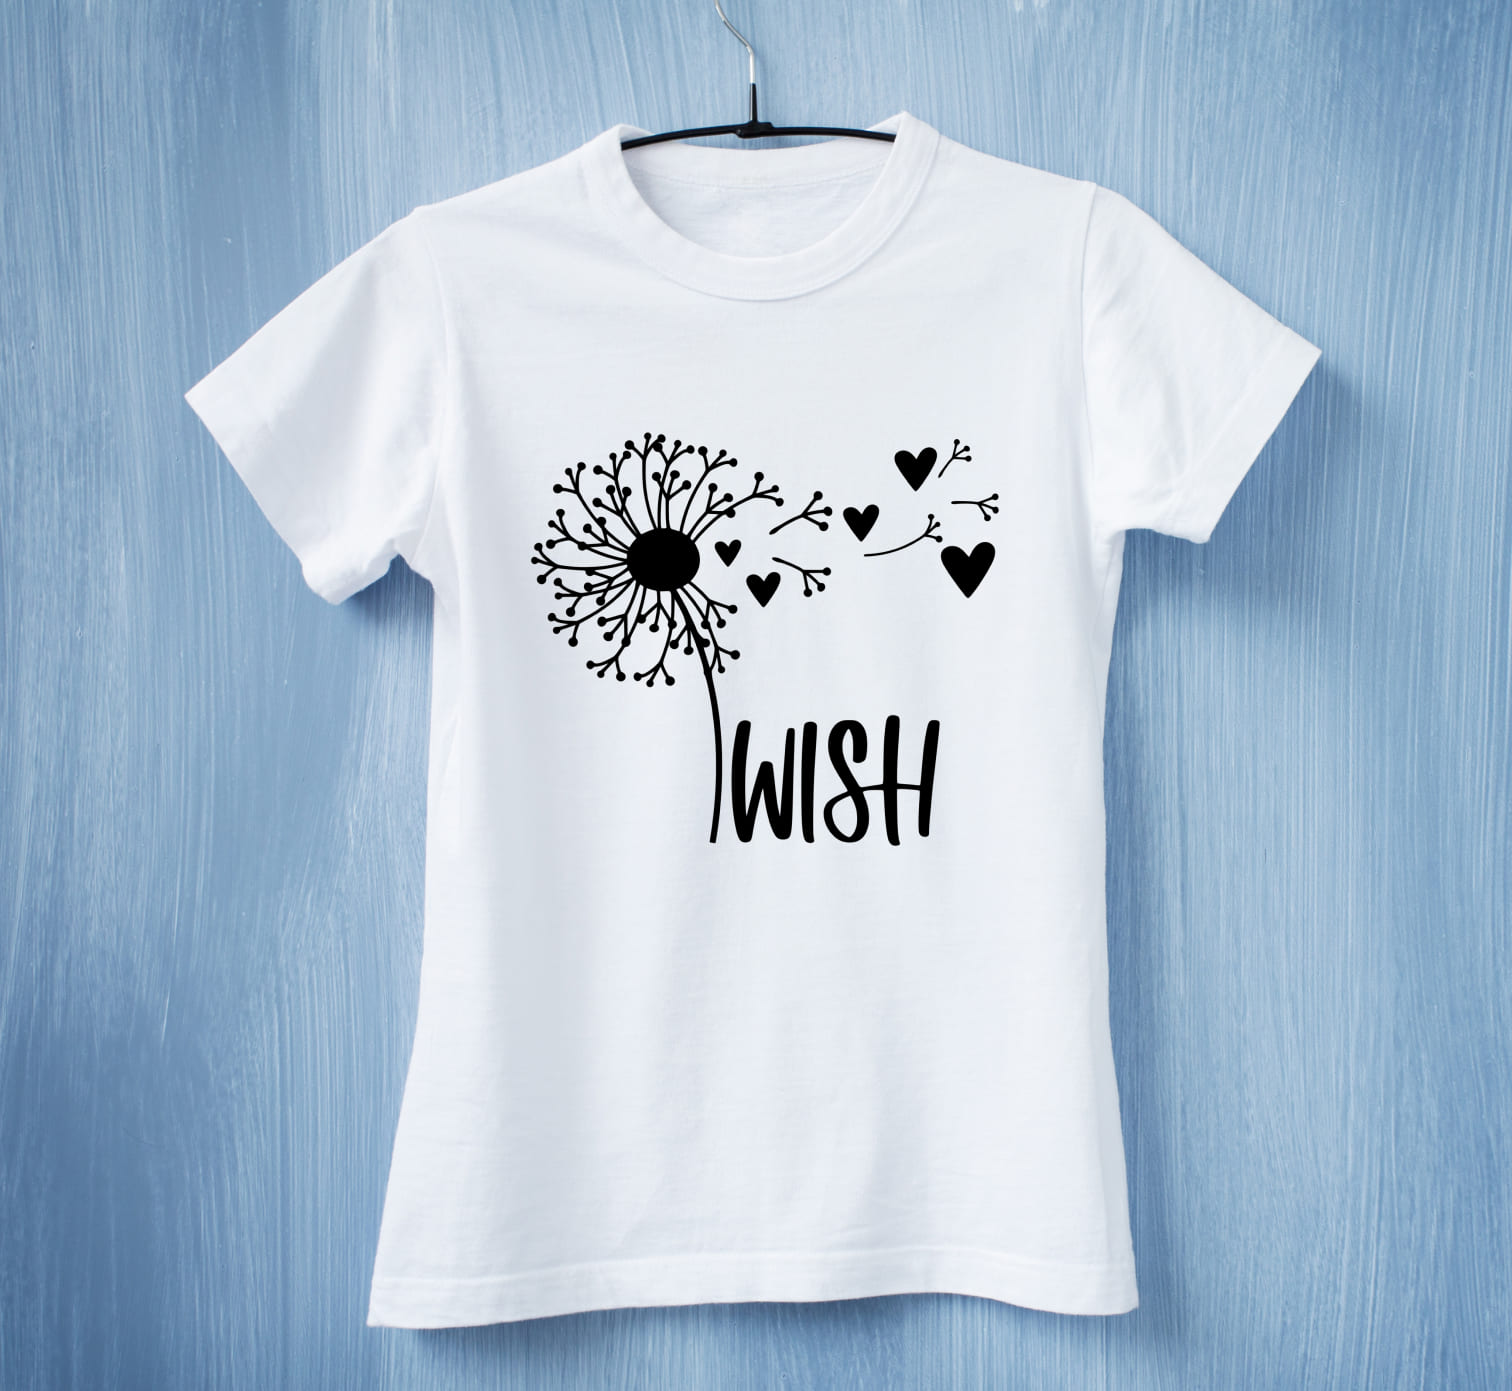 A white t-shirt with a black dandelion flower with black hearts and black kettering "WIsh" on a blue background.